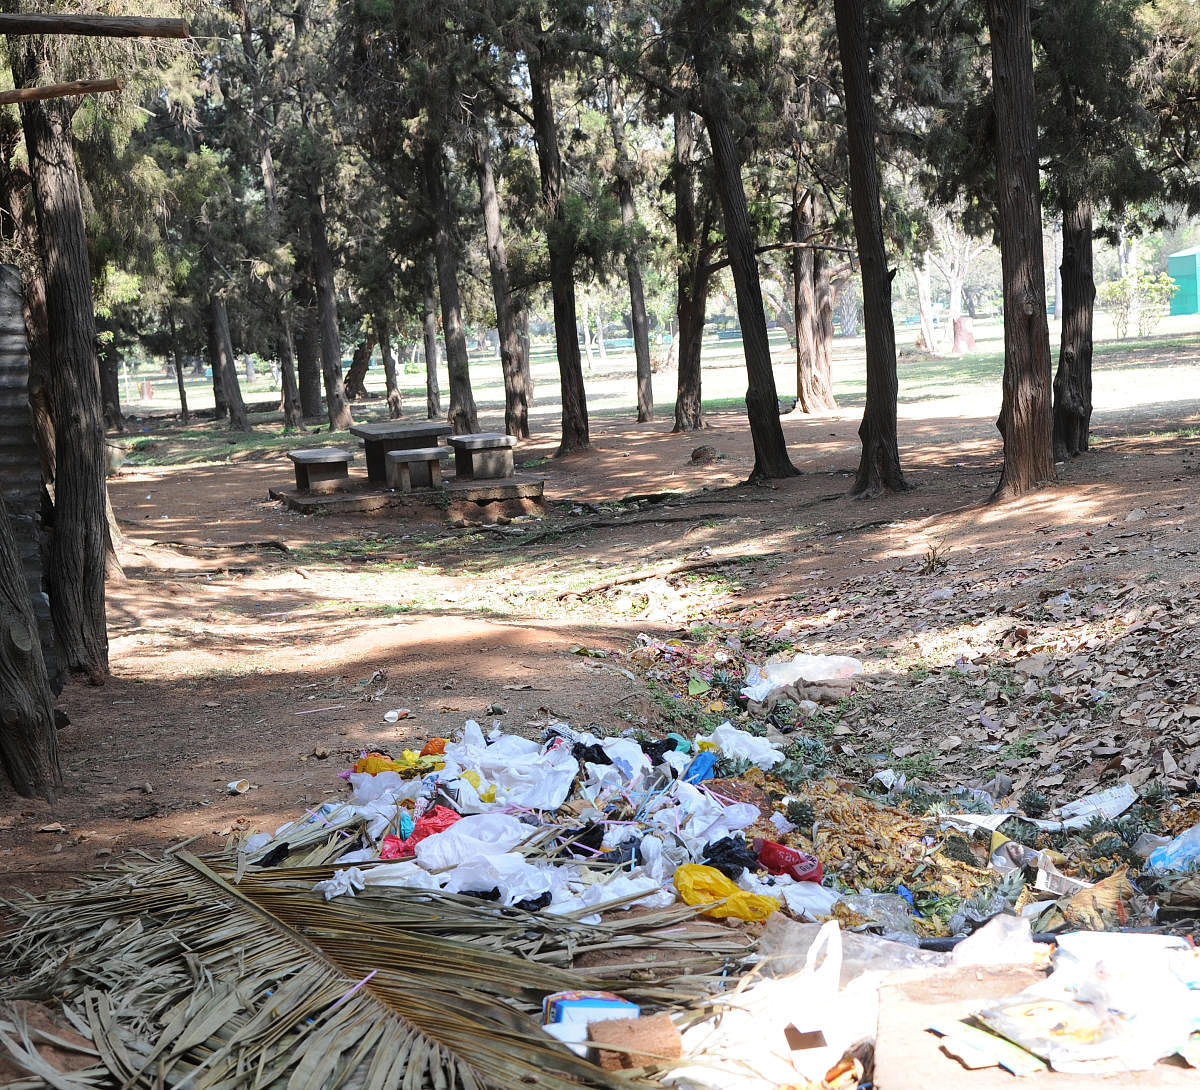 Waste piled up at Lalbagh.